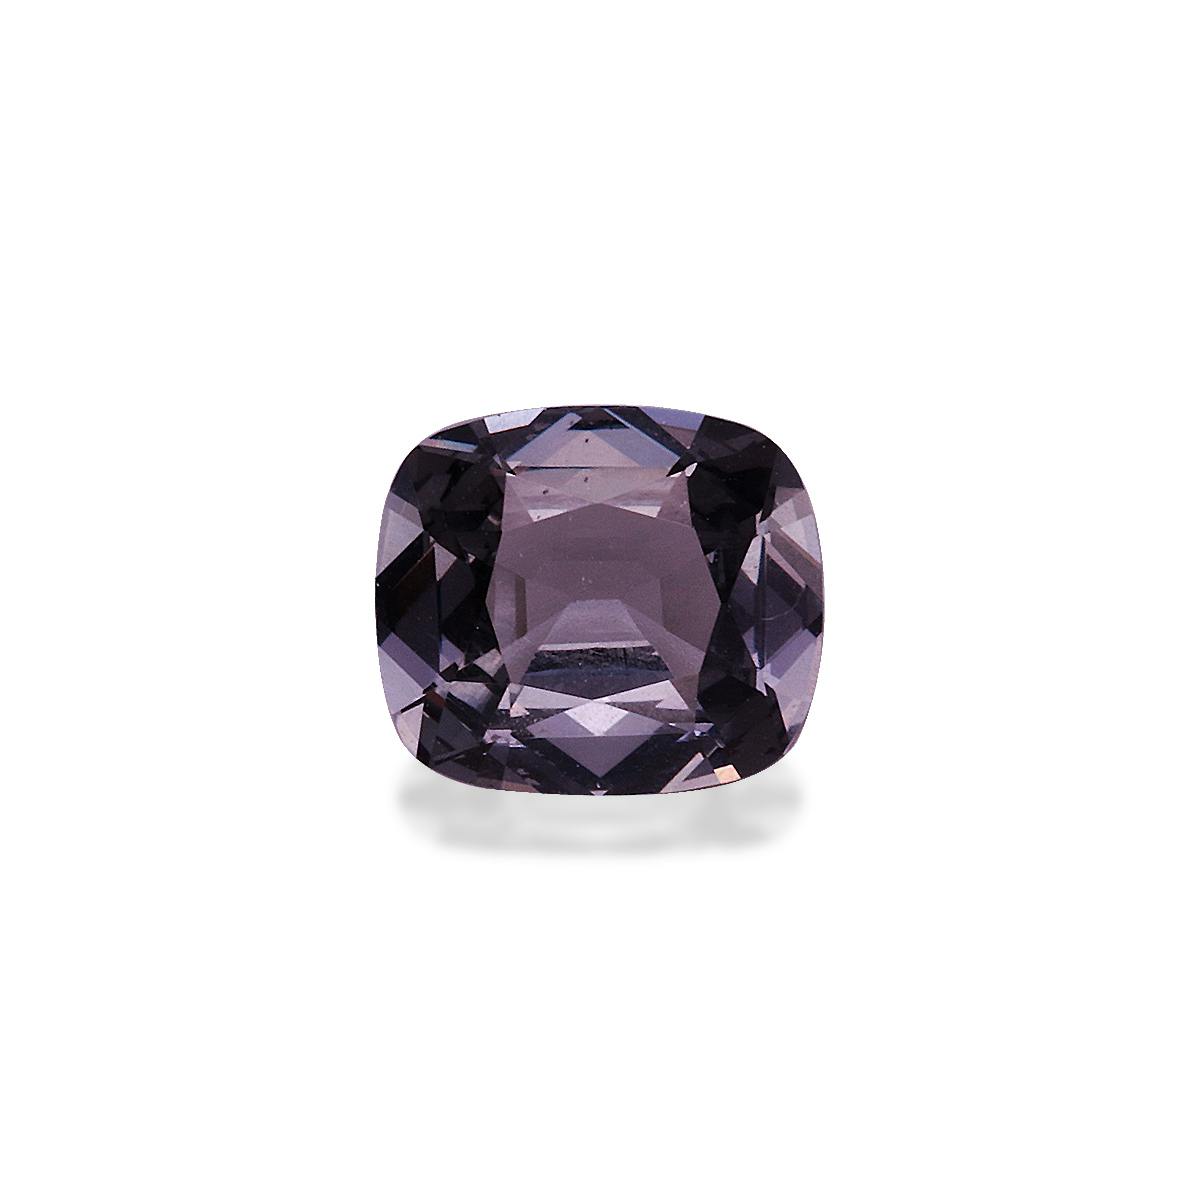 Grey Spinel 0.97ct (SP0222)